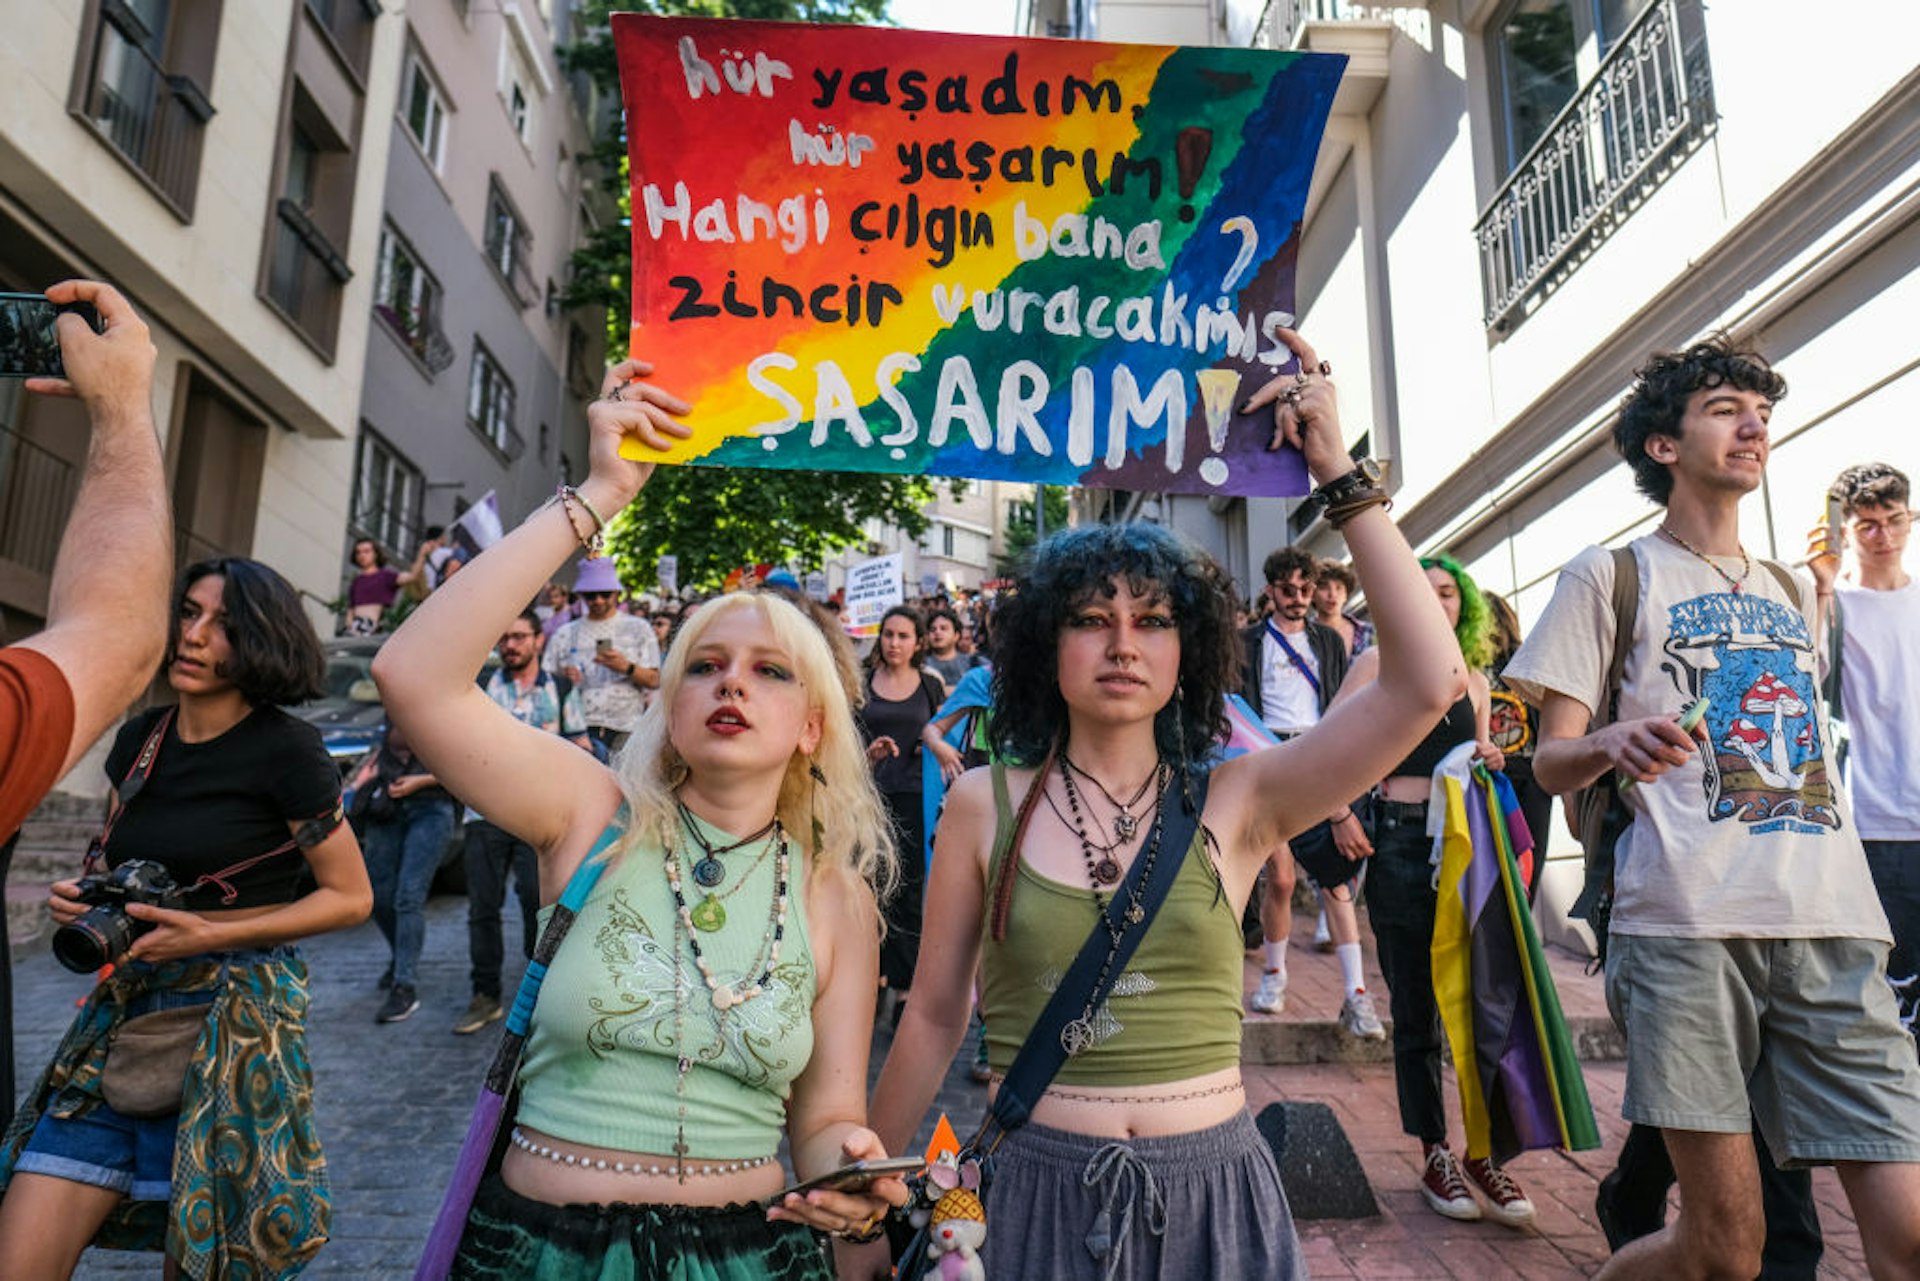 Two women holding rainbow signs protest for the rights of LGBTQ people in a crowded street. 